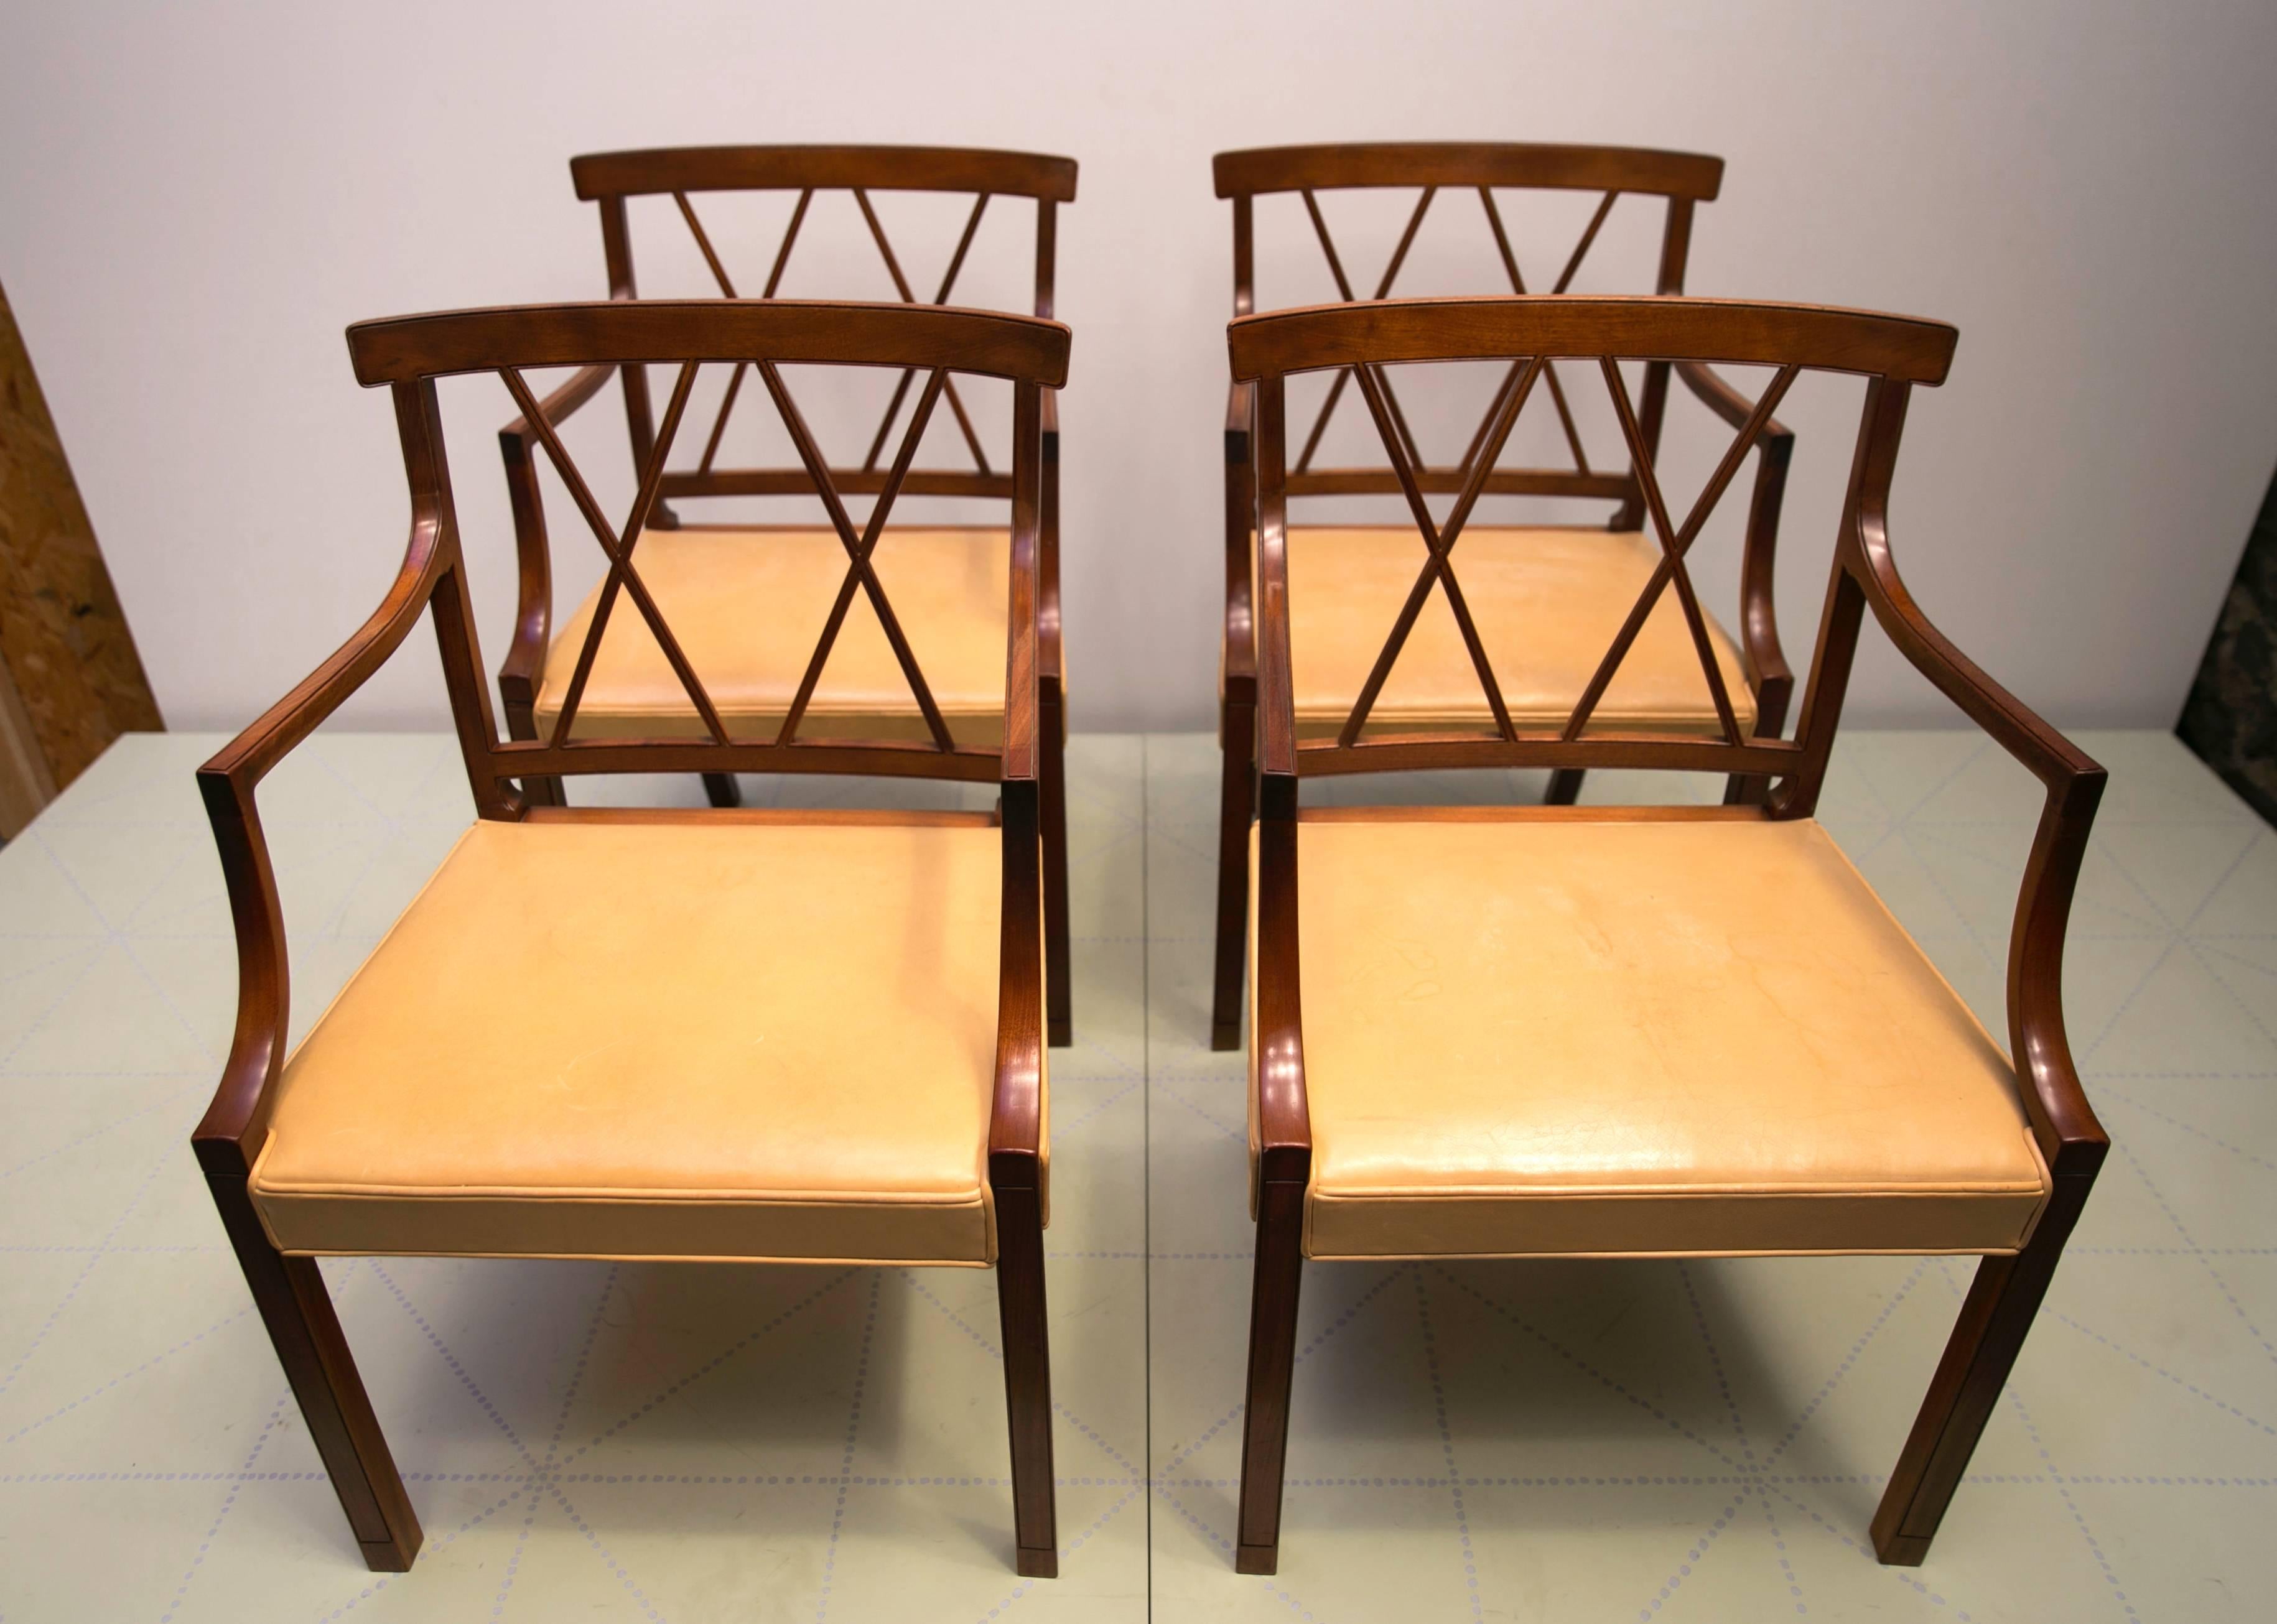 Four Elegant Armchairs by Ole Wanscher, Cuban Mahogany and Original Pale Leather. These elegant and beautifully detailed armchairs were designed by Wanscher in 1943. As is typical of Wanscher and his master cabinetmaker A.J. Iversen, the delicate